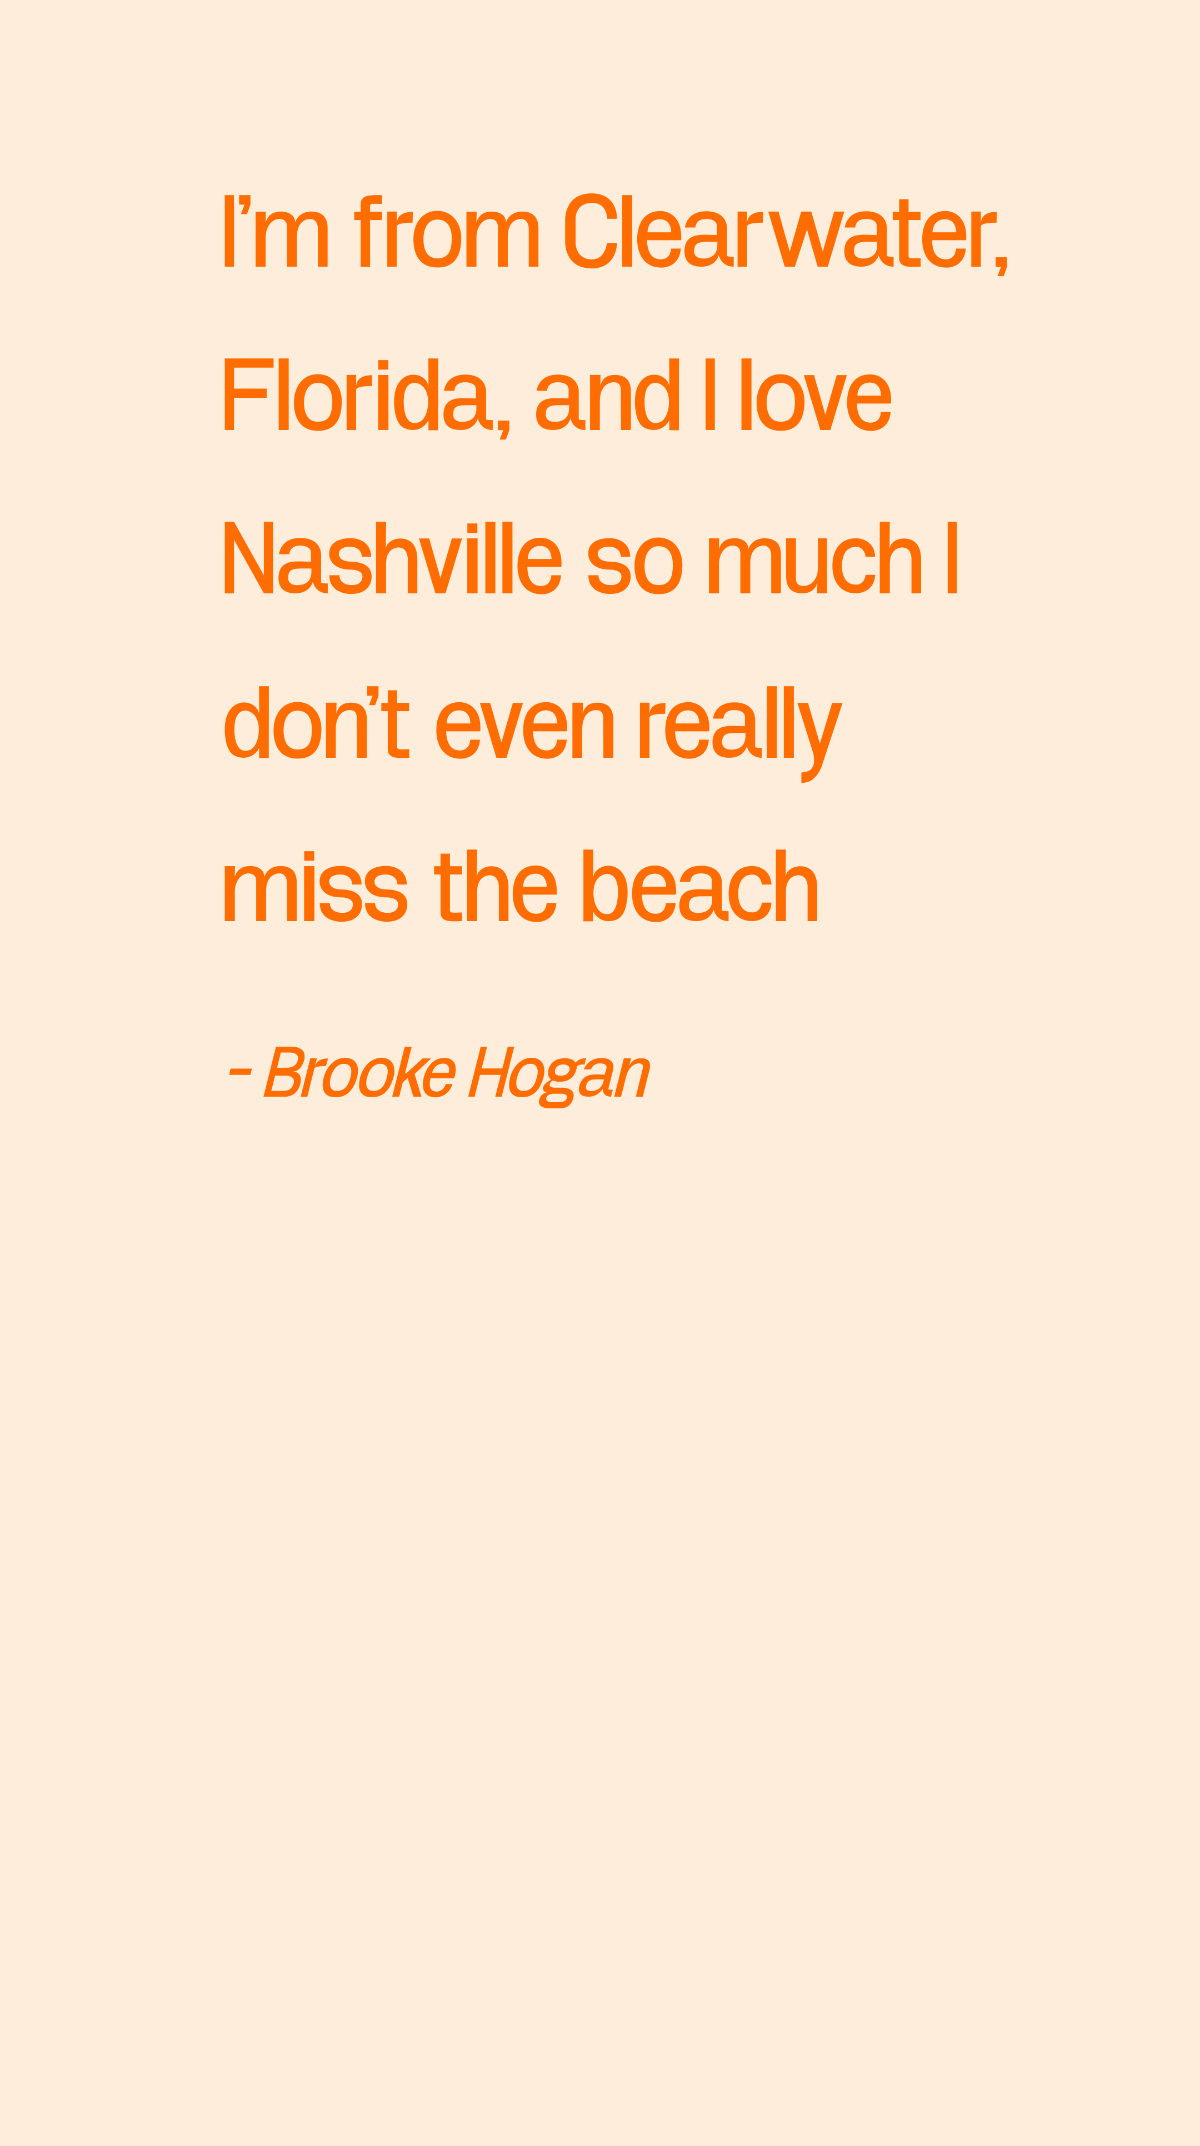 Brooke Hogan - I'm from Clearwater, Florida, and I love Nashville so much I don't even really miss the beach Template